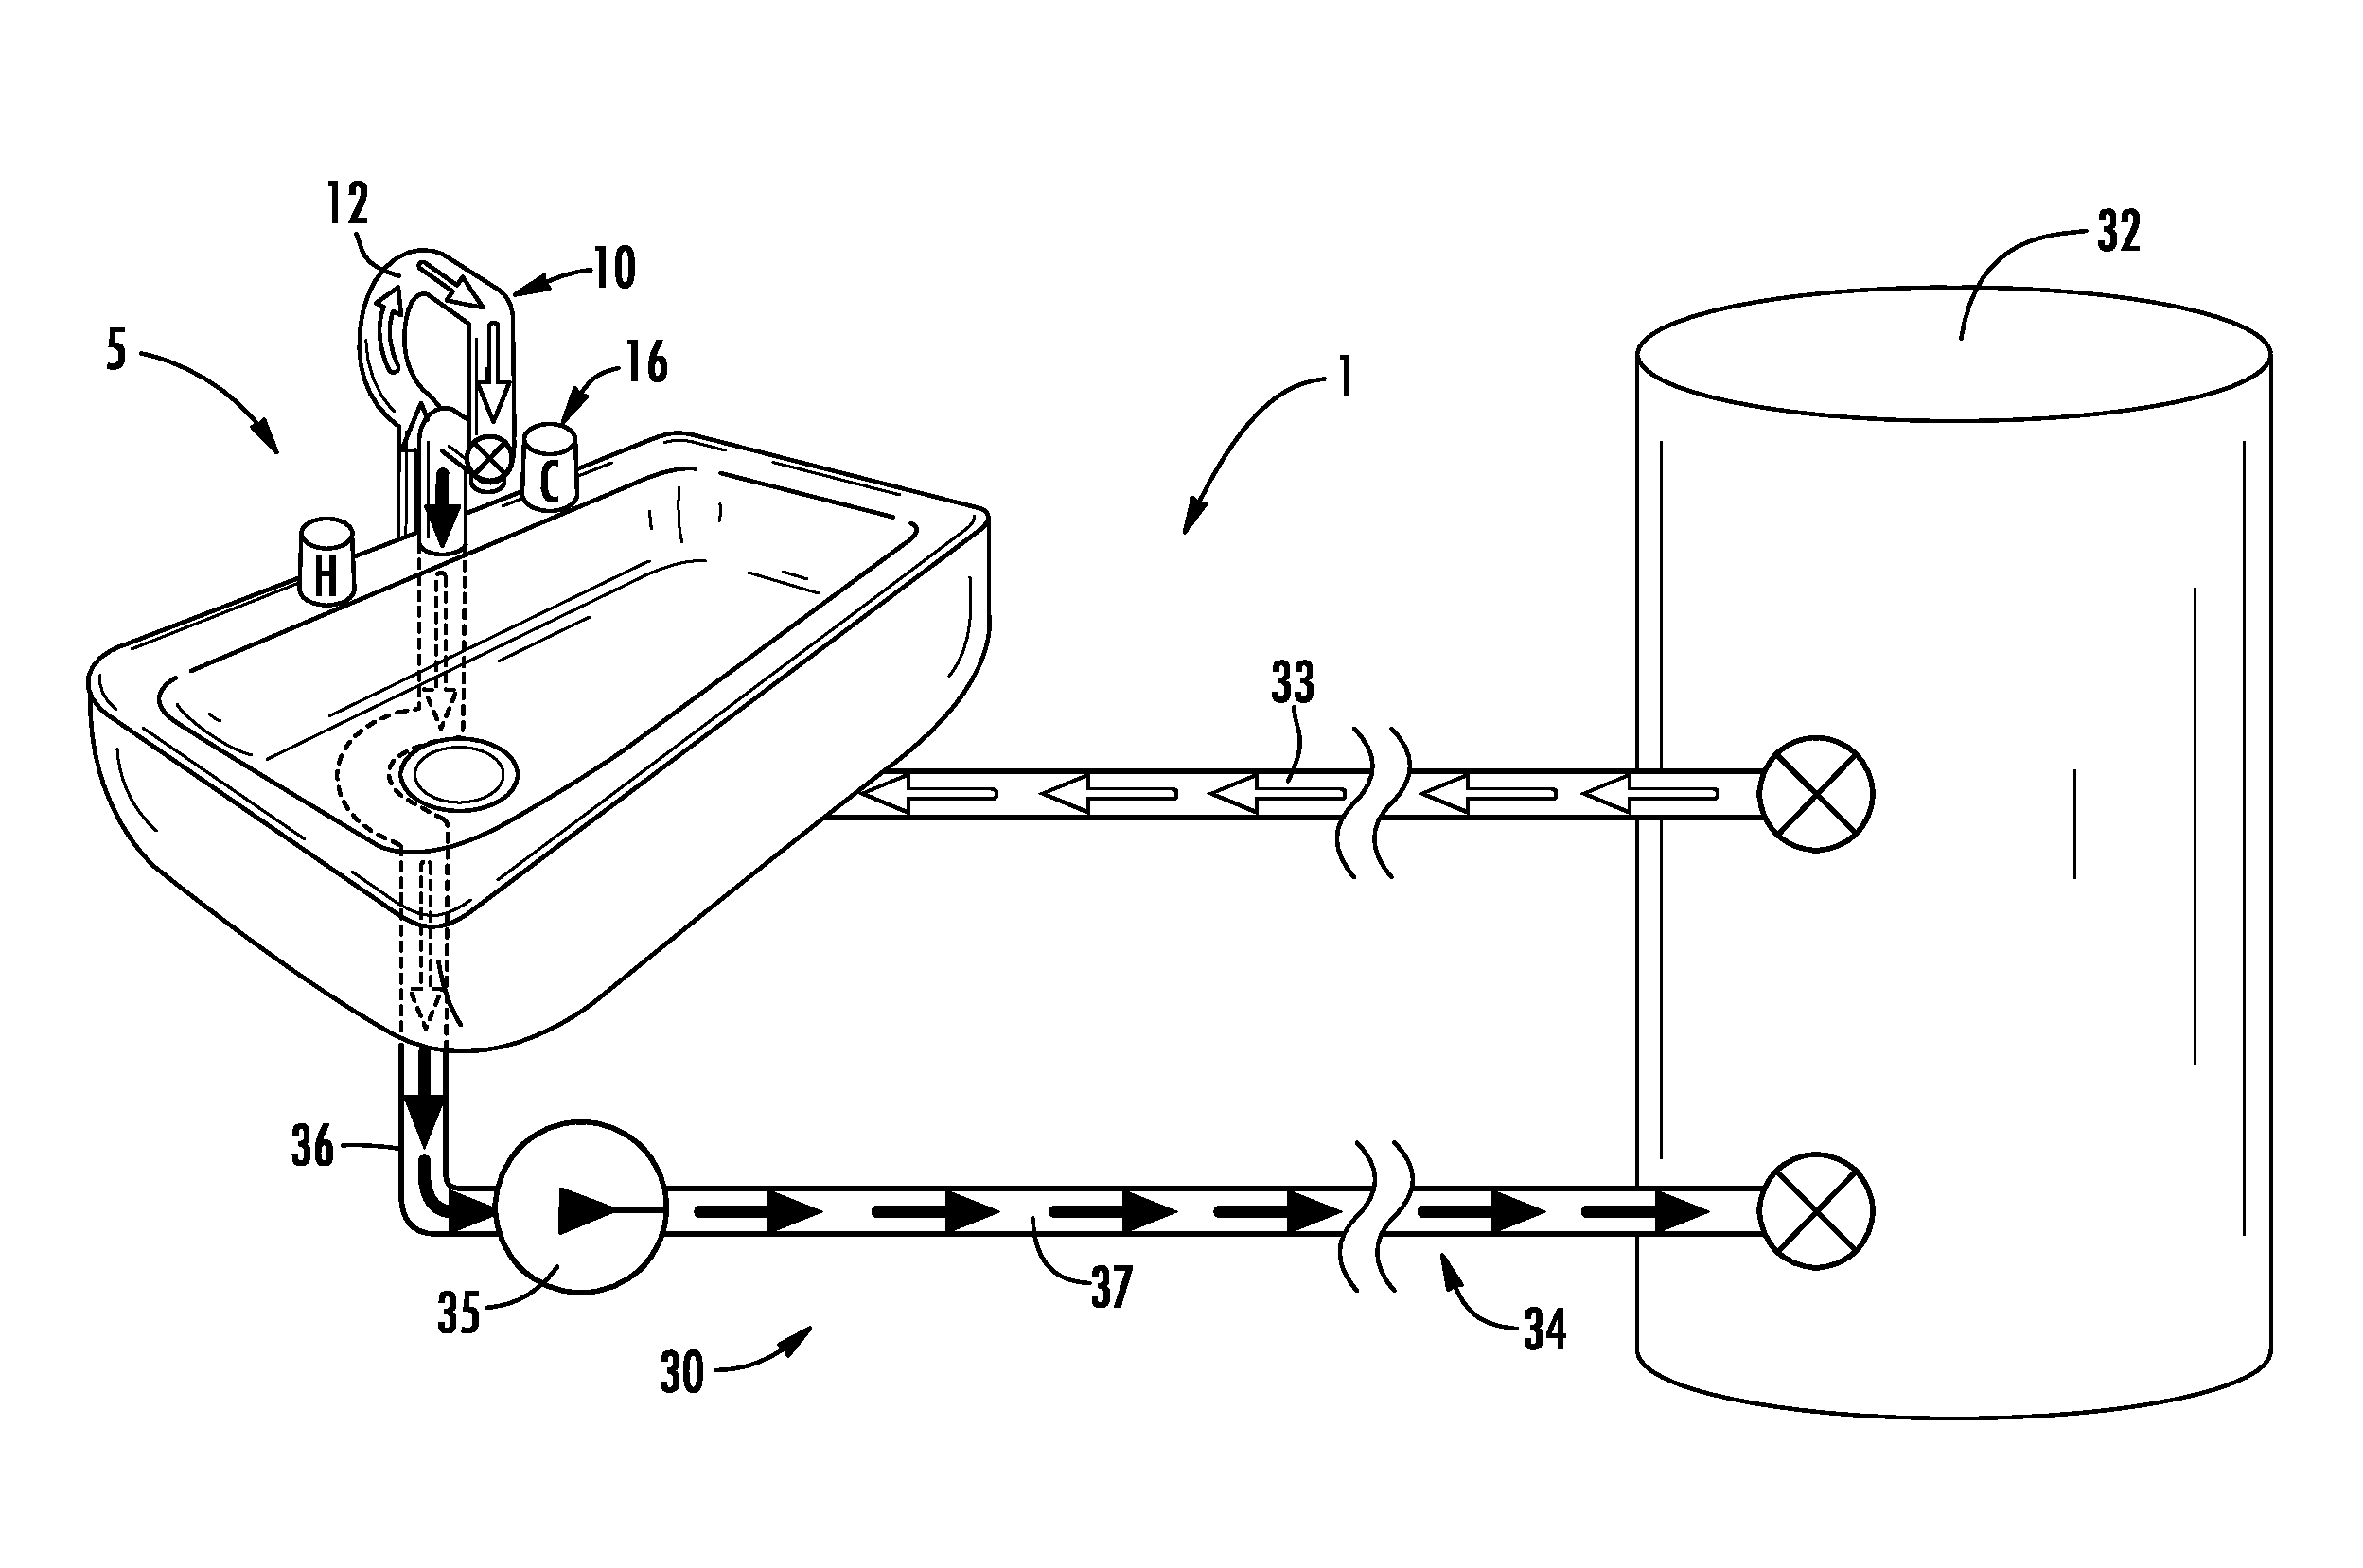 Water conservation systems and methods of using the same